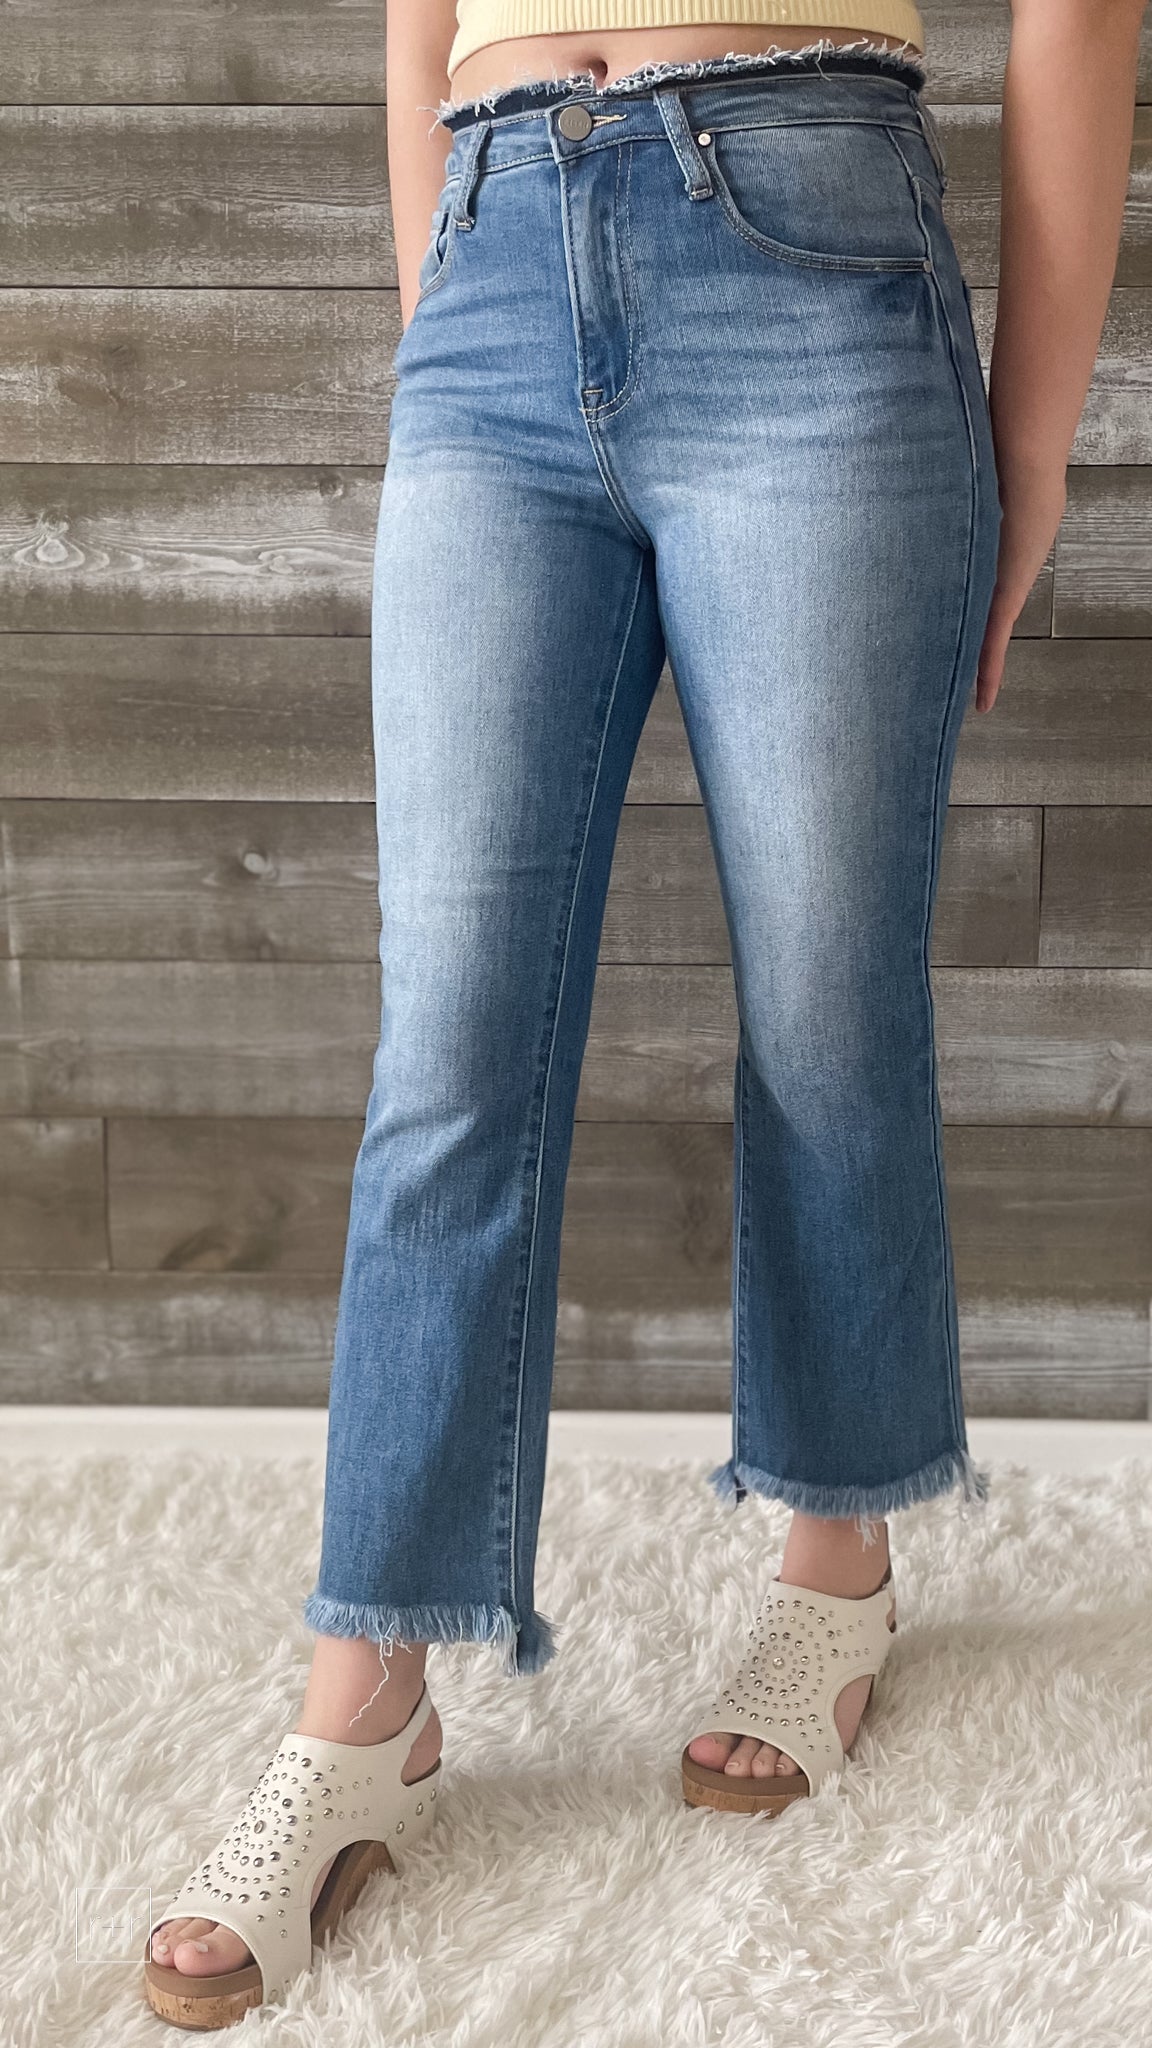 Cropped flared jeans - Women